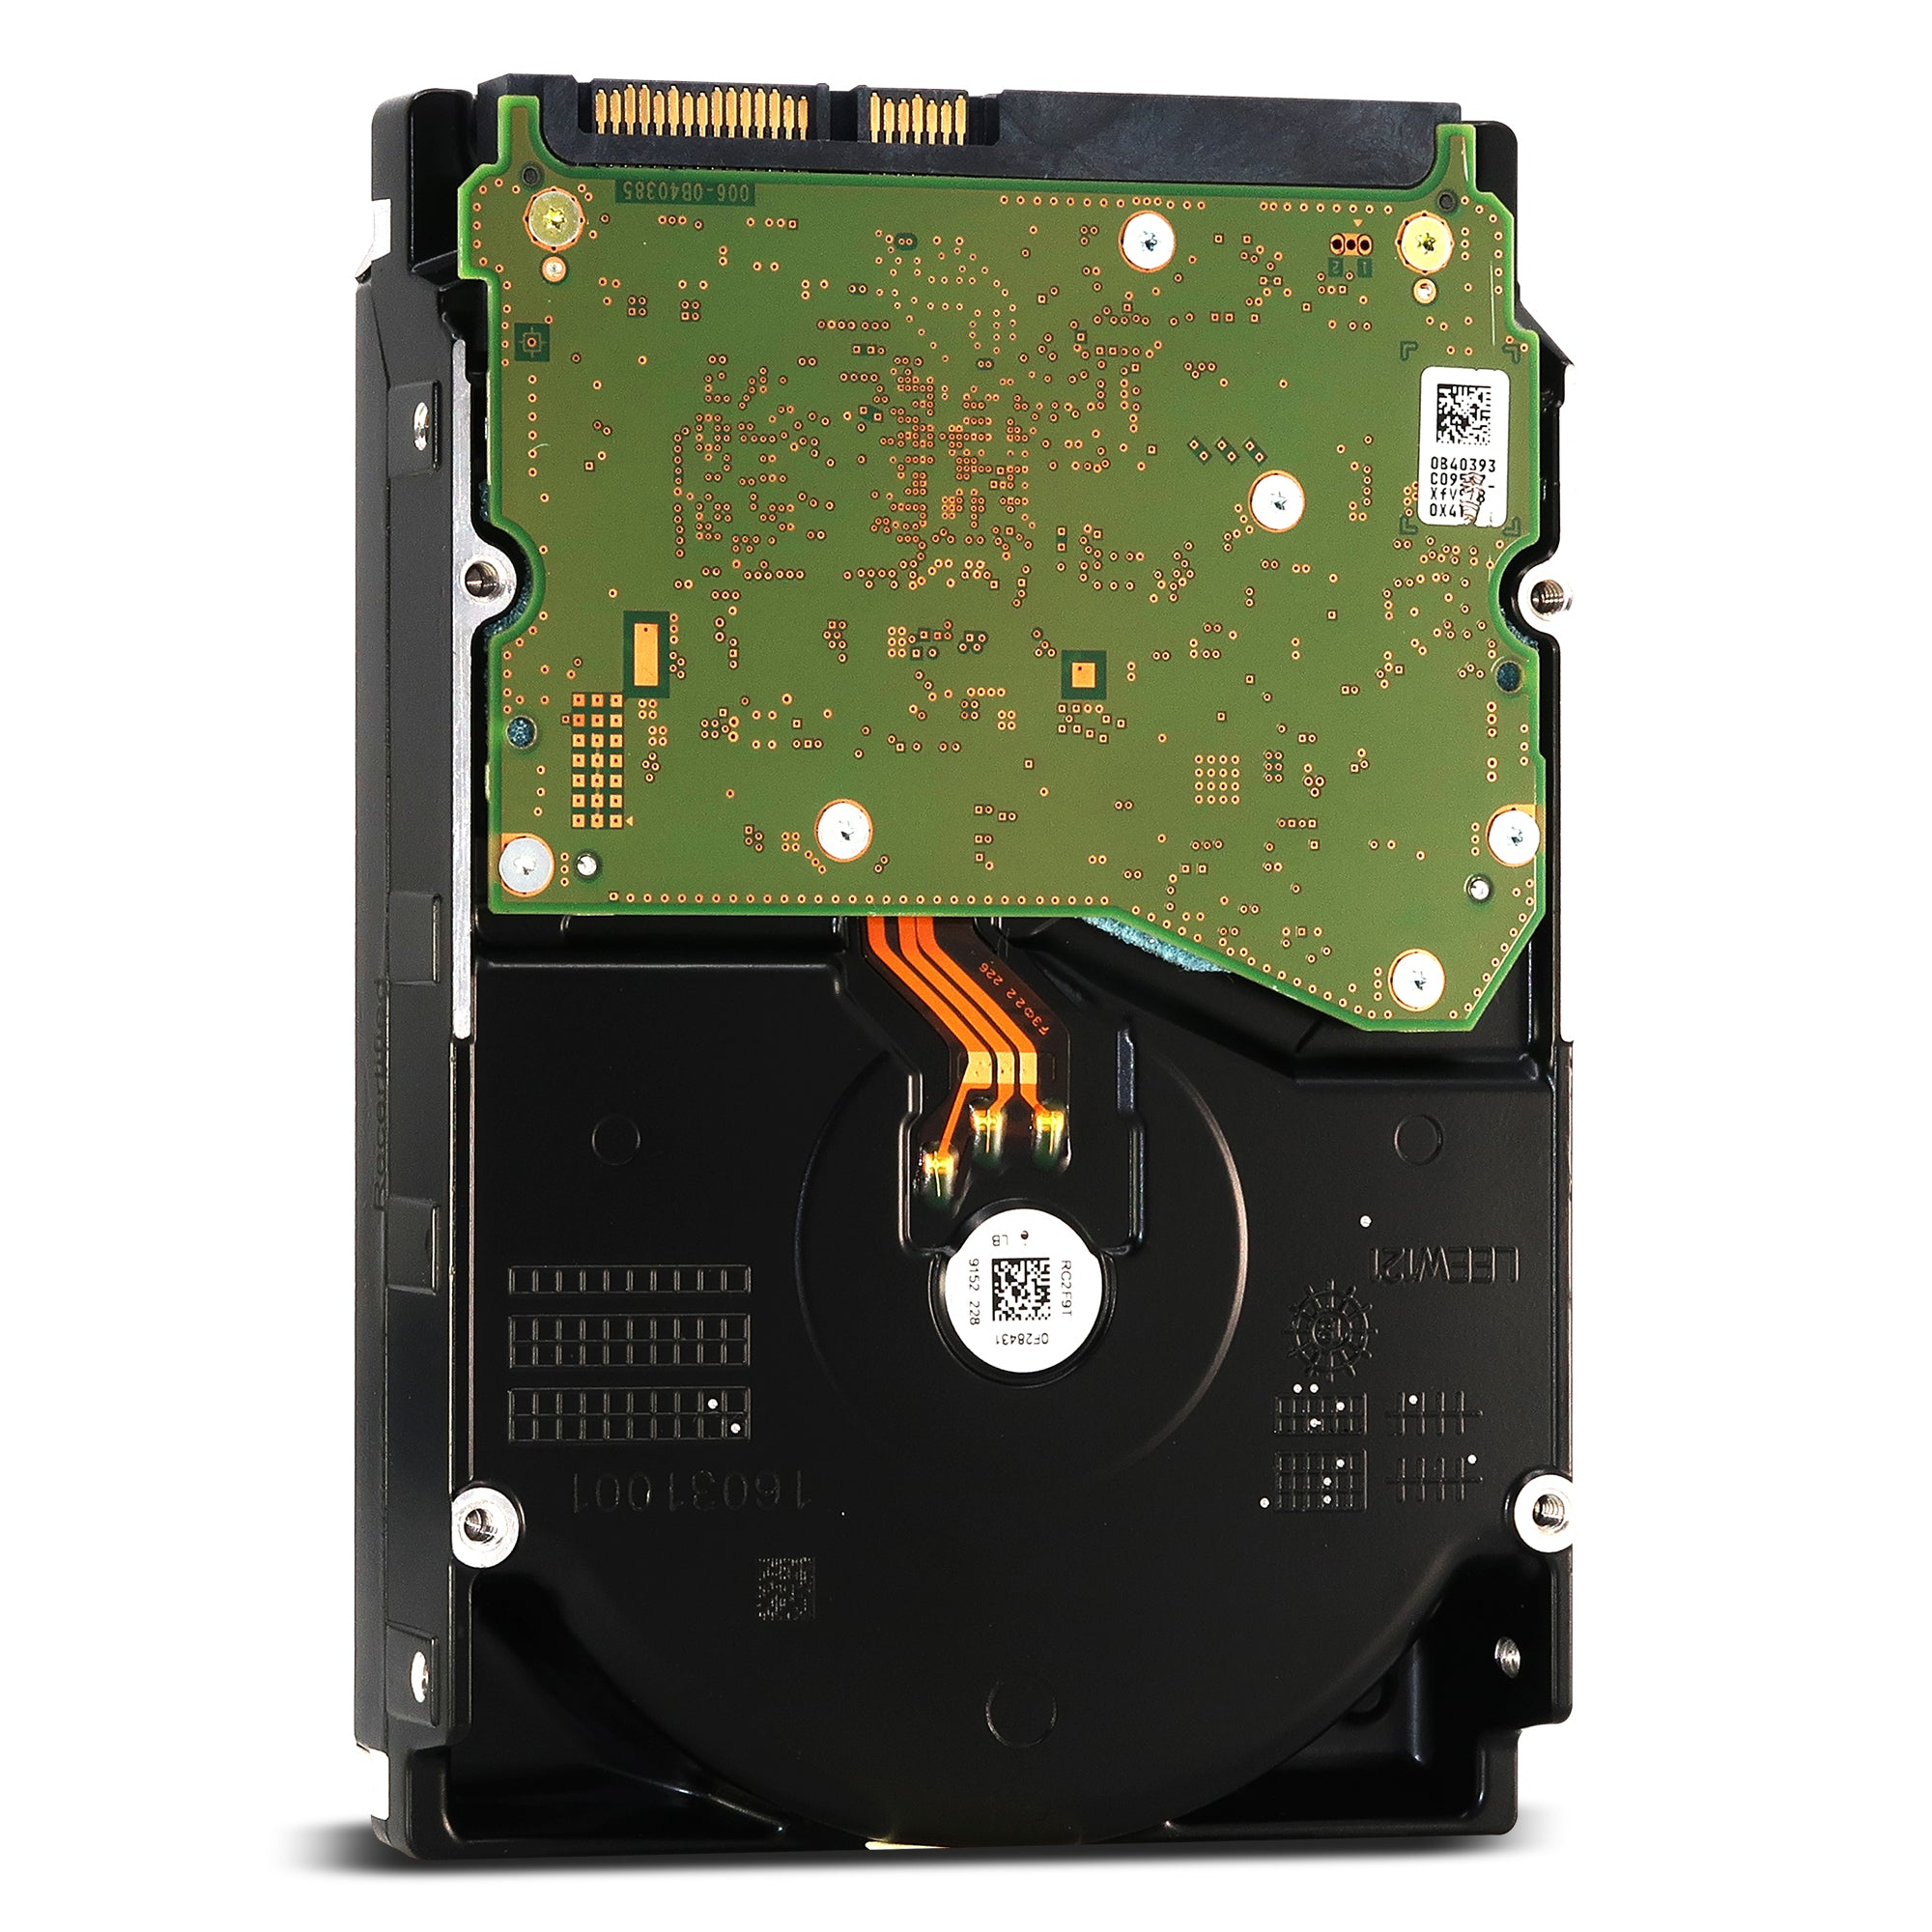 WD Ultrastar HC520 HUH721212ALN600 0F29620 12TB 7.2K RPM SATA 6Gb/s 4Kn 256MB 3.5" ISE Power Disable Pin Manufacturer Recertified HDD - Rear View